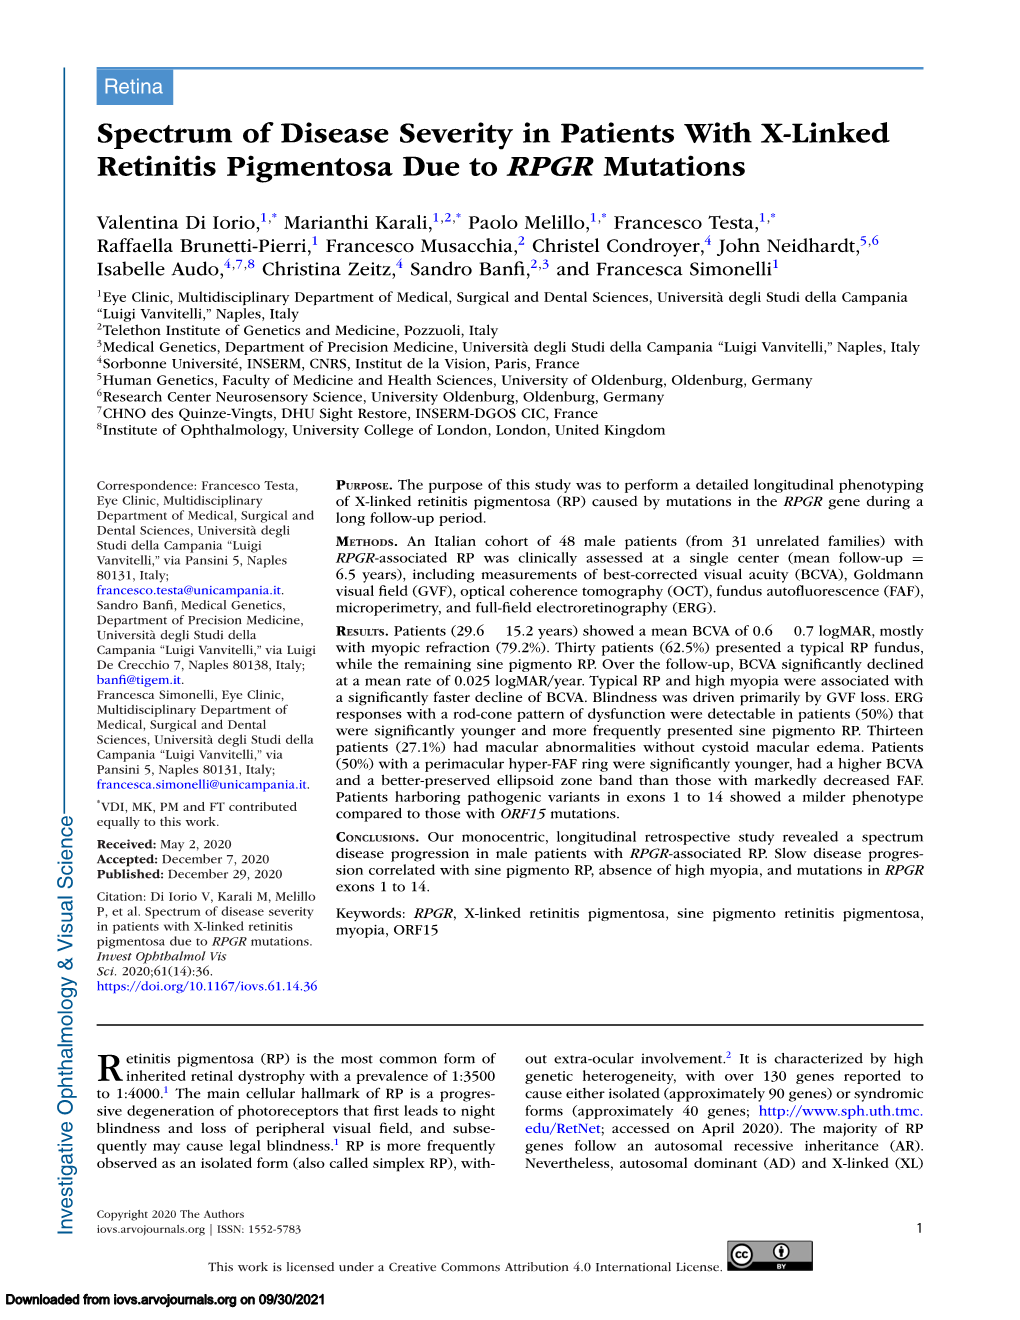 Spectrum of Disease Severity in Patients with X-Linked Retinitis Pigmentosa Due to RPGR Mutations